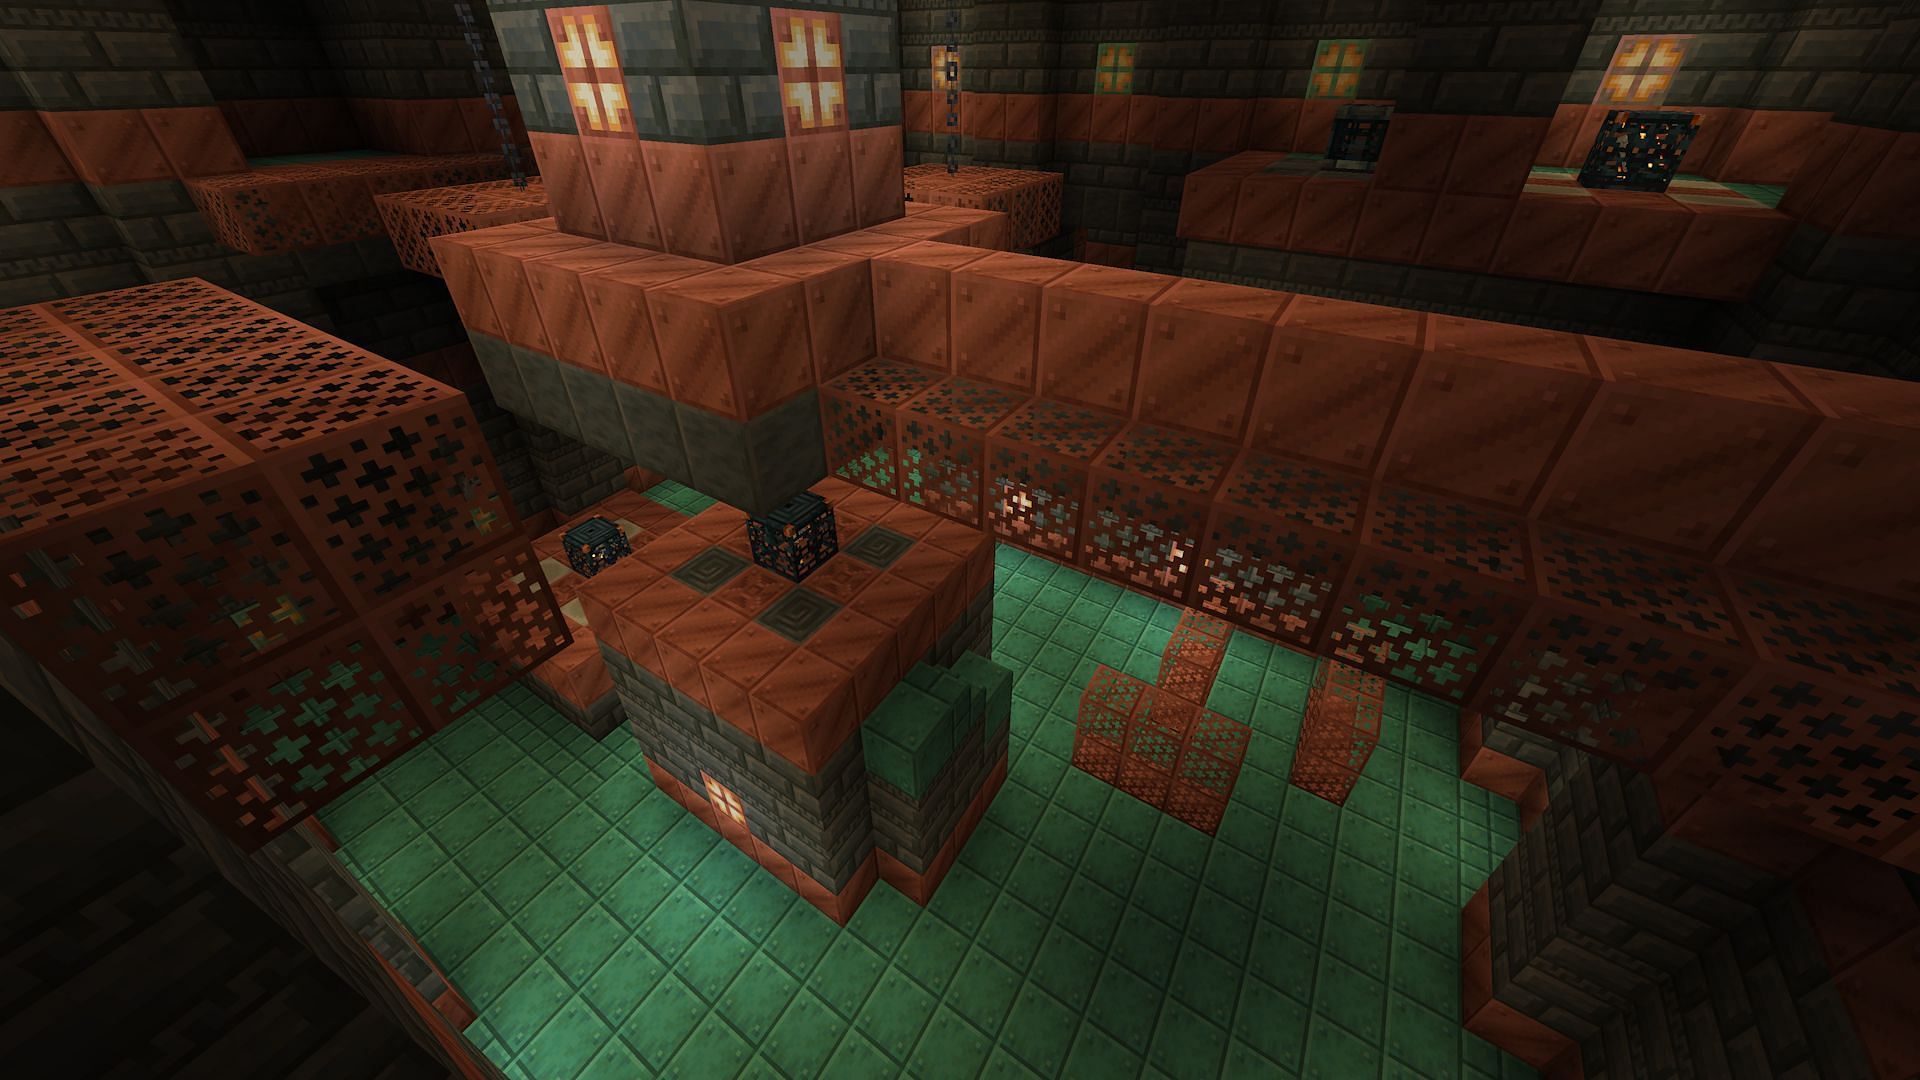 There tend to be several trial spawners per room (Image via Mojang)